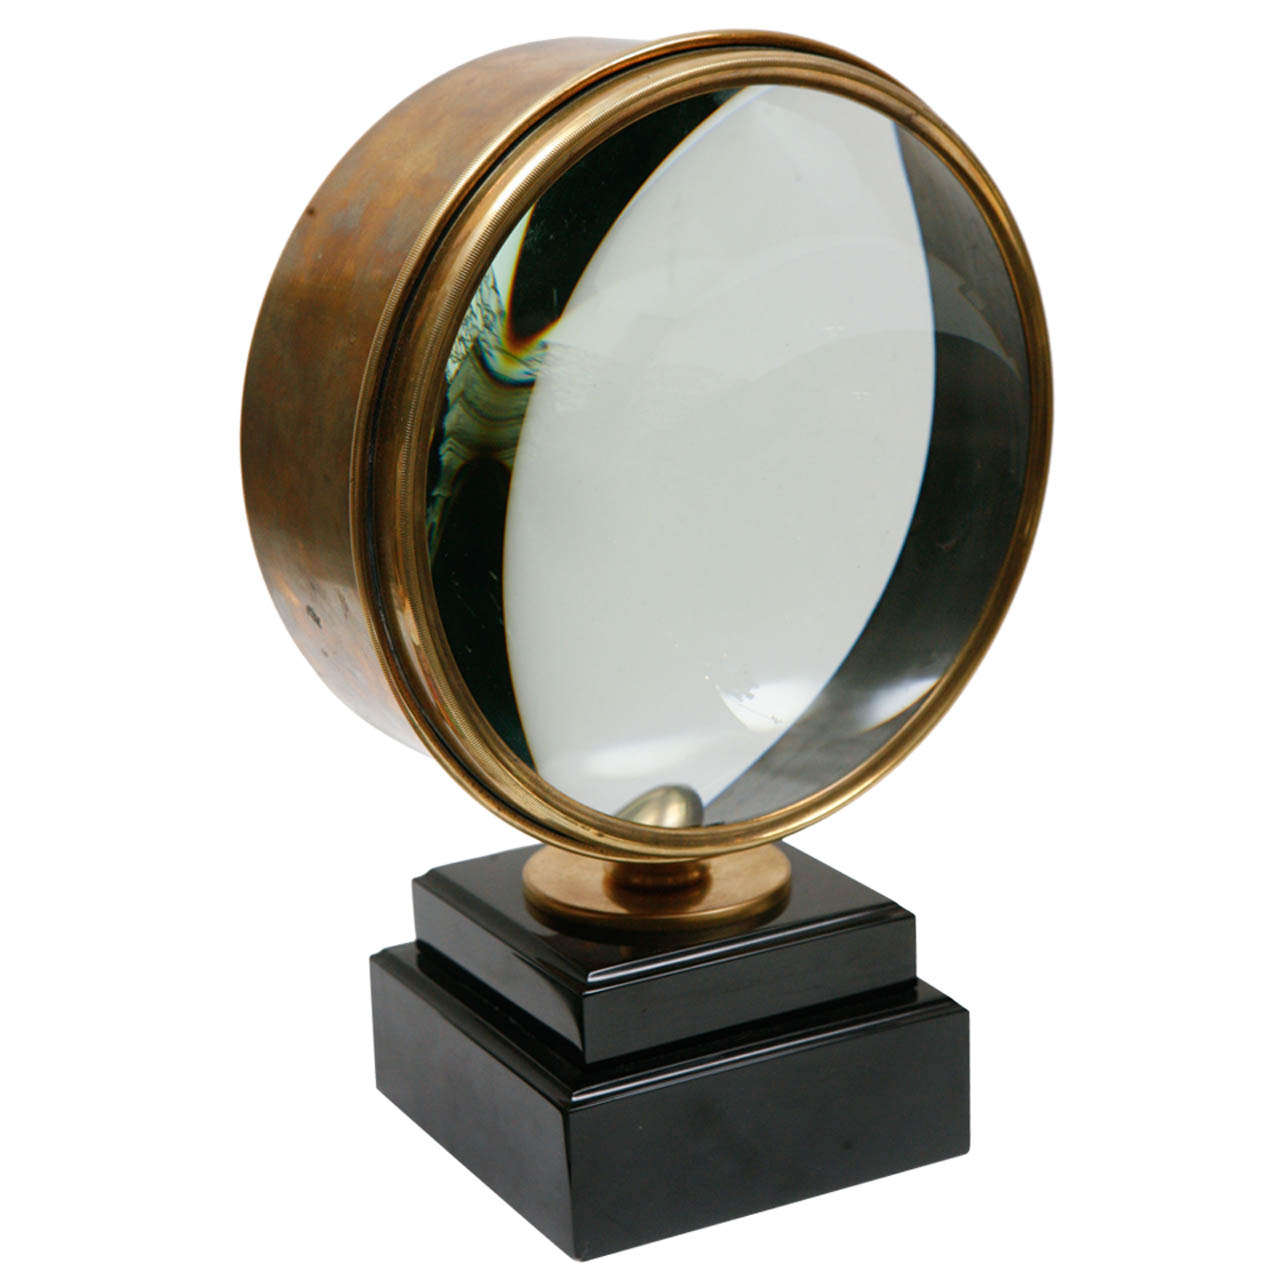 Large jewelry magnifying glass with light for Sale in Tampa, FL